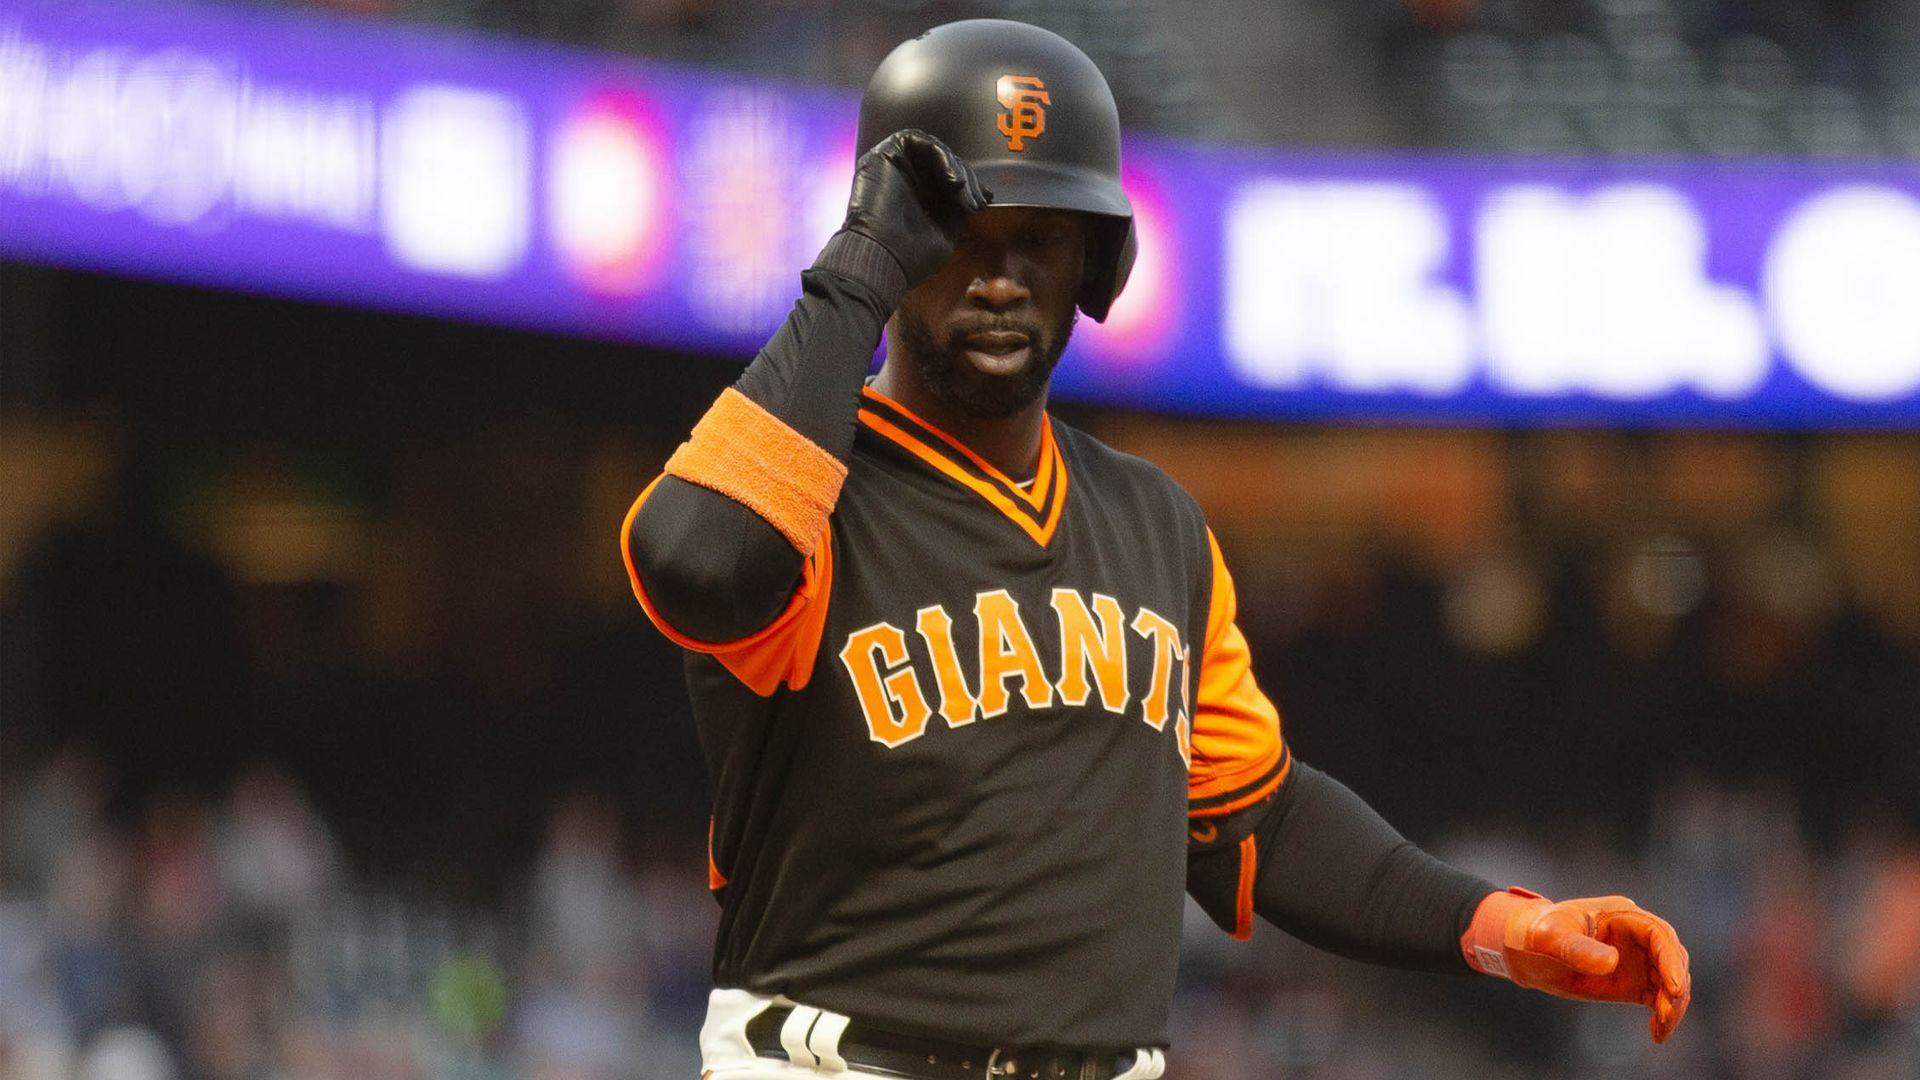 Ex Giant Andrew McCutchen Gets Yankees Makeover Ahead Of New York